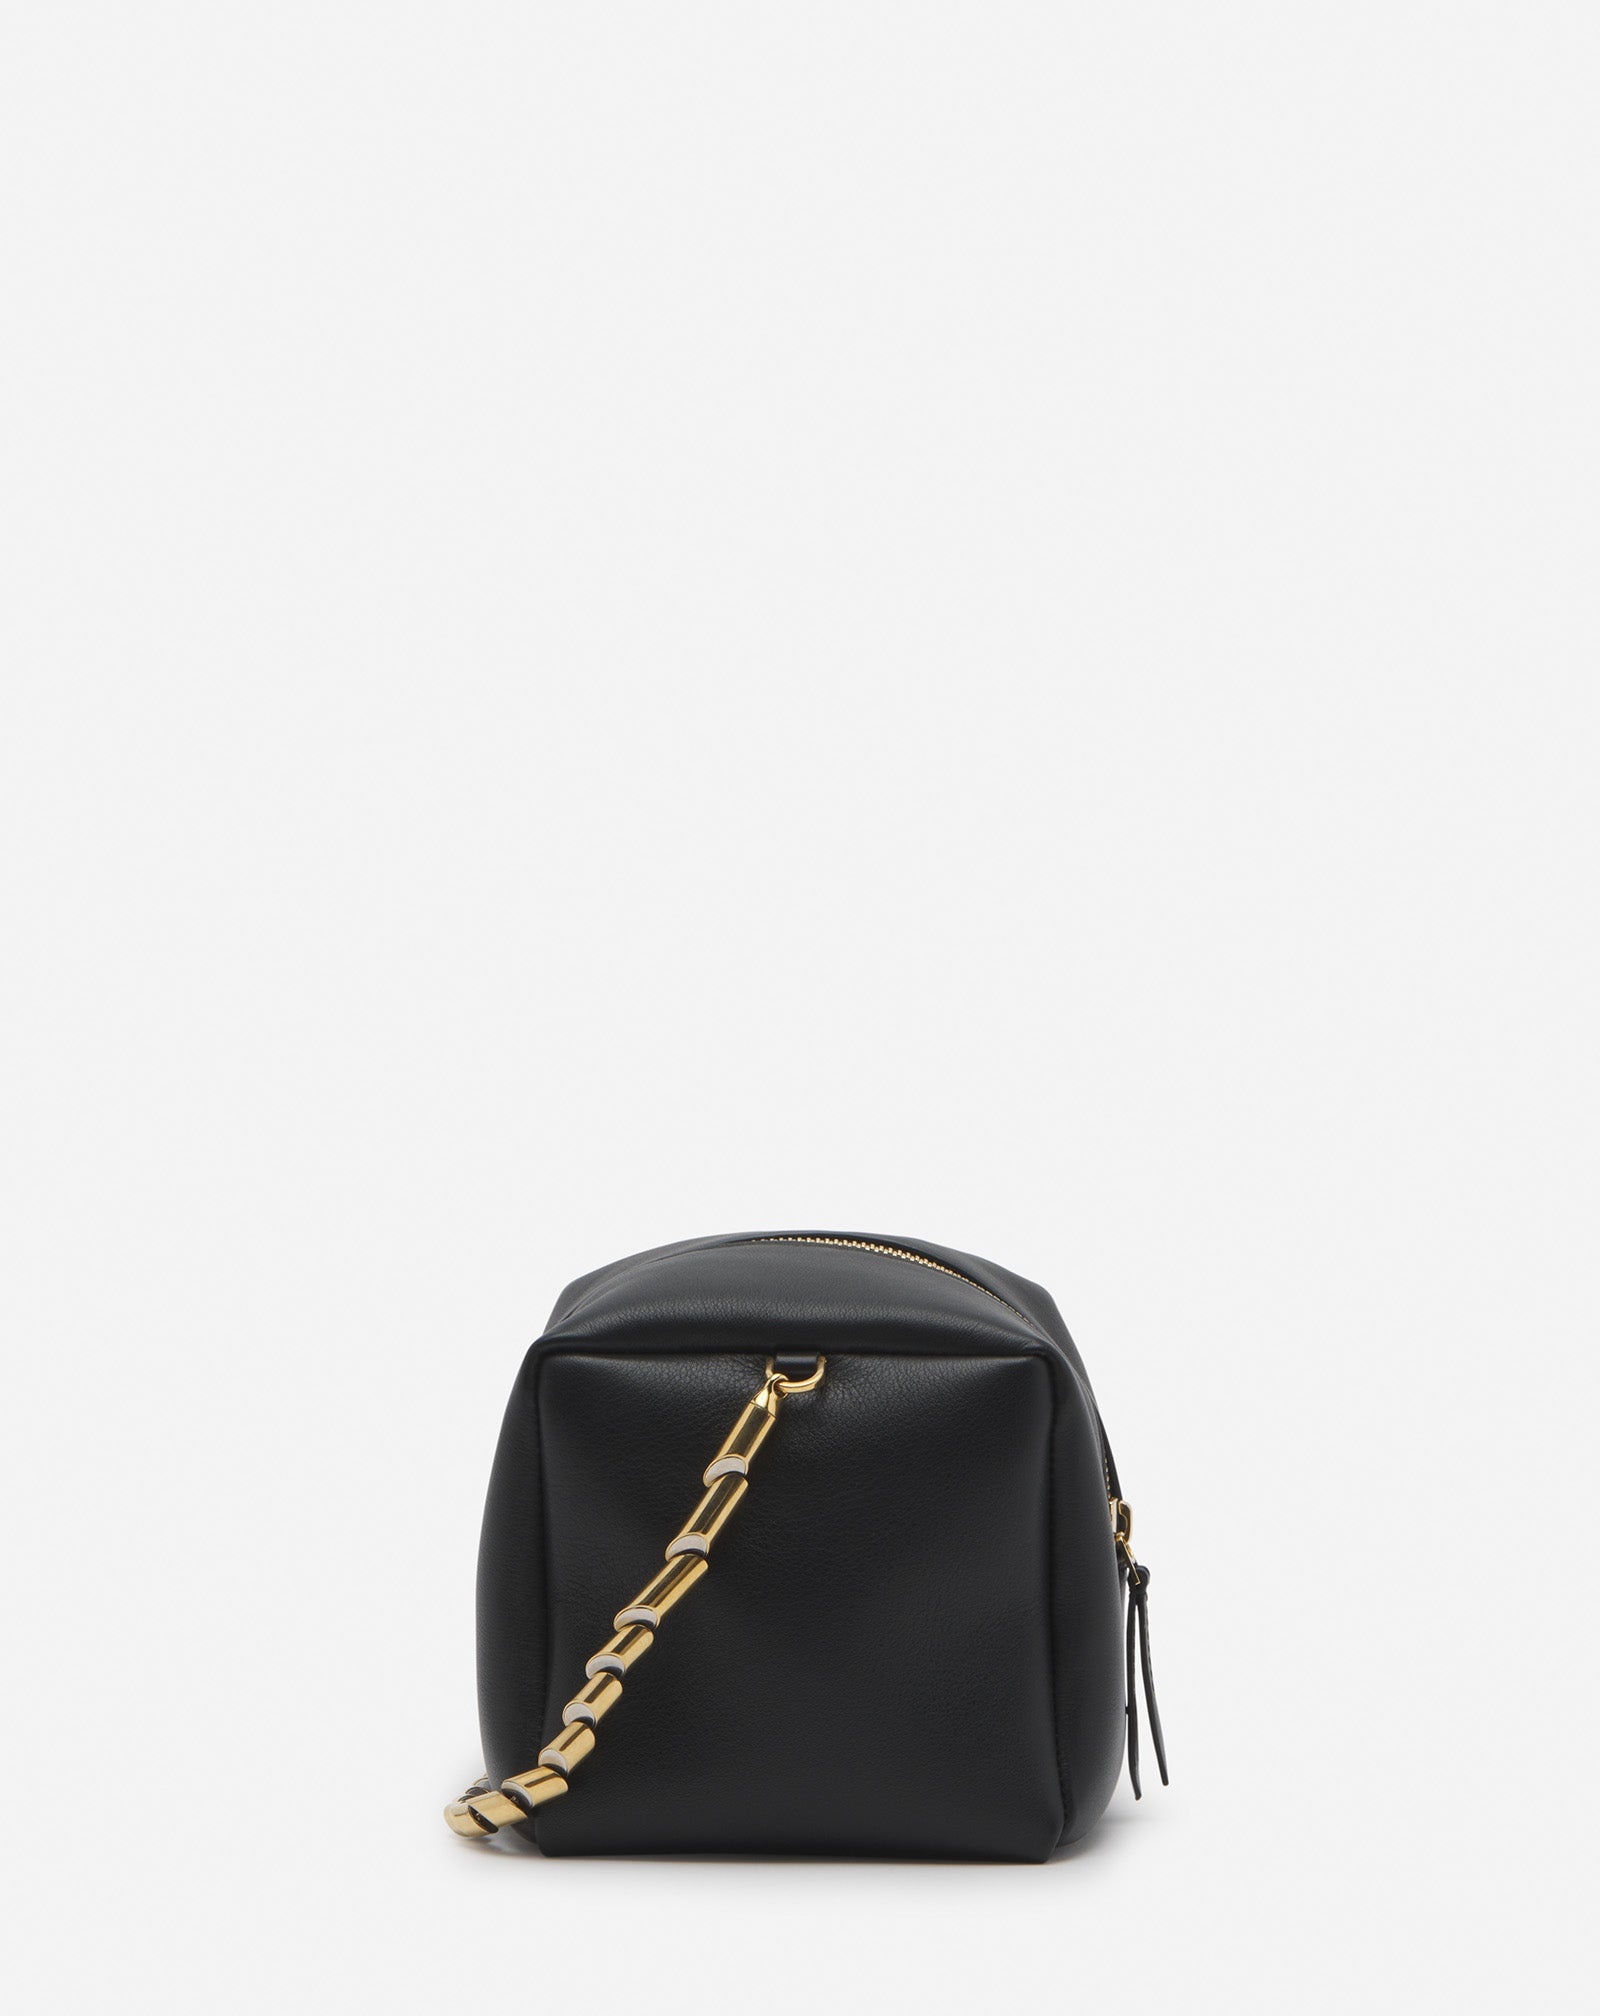 TEMPO BY LANVIN LEATHER BAG WITH SEQUENCE BY LANVIN CHAIN - 3